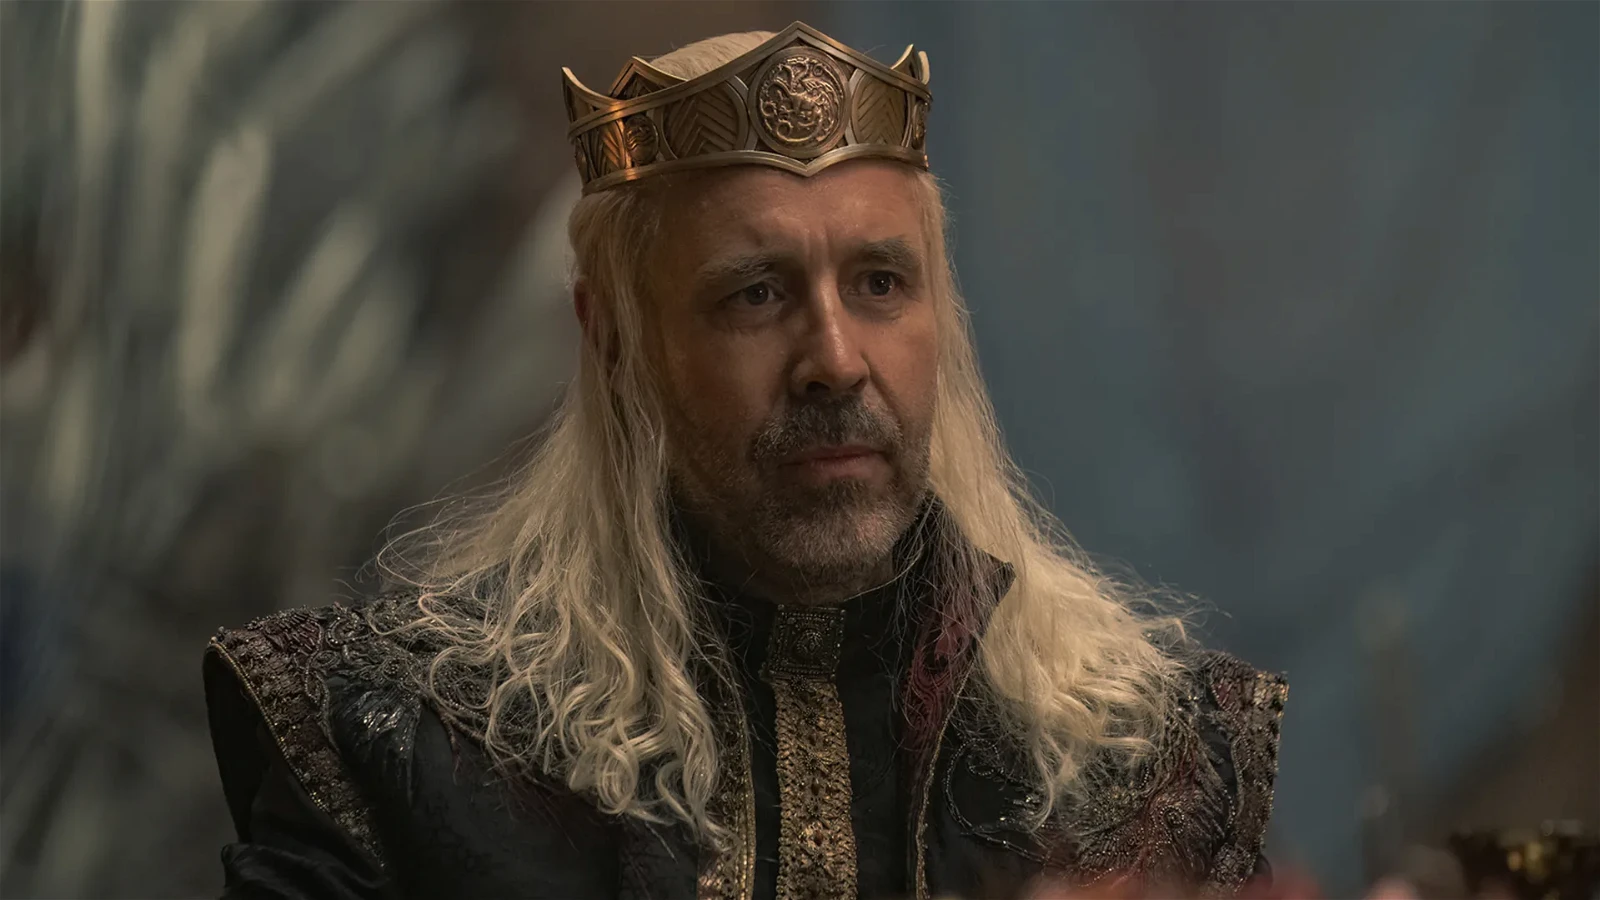 Paddy Considine as King Viserys in House of the Dragon.